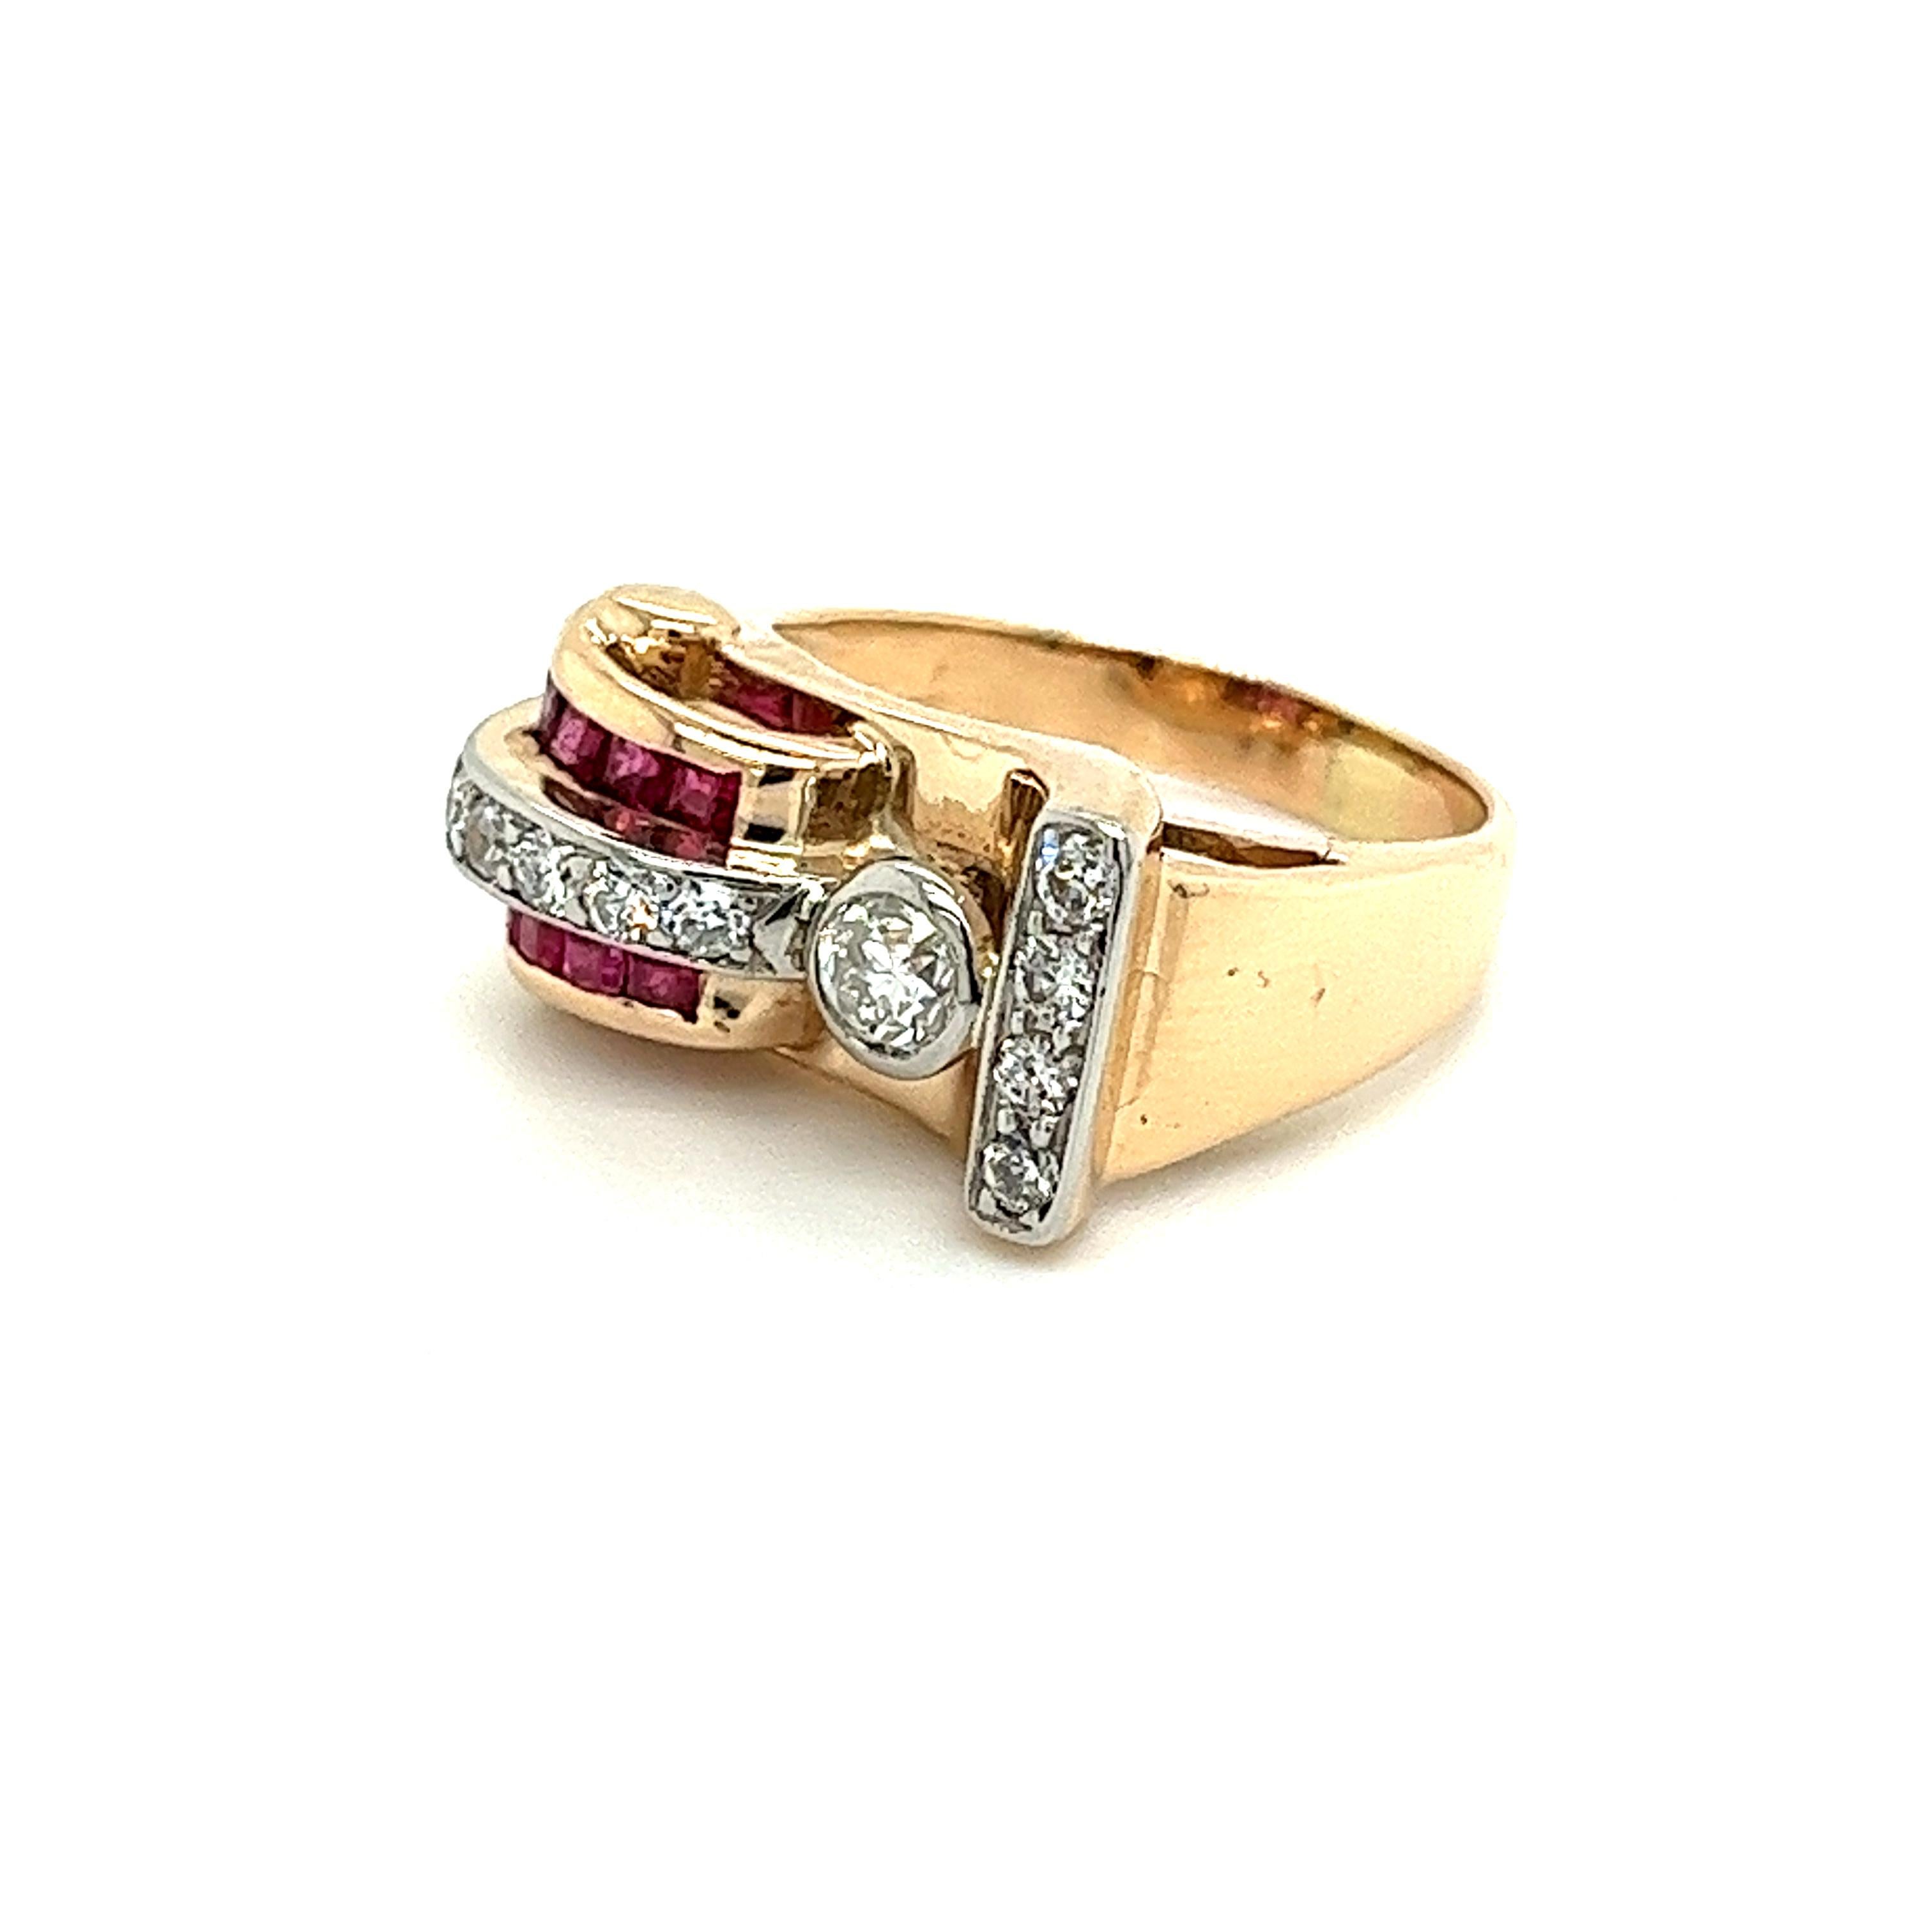 Women's Vintage 14k Gold Retro Style Old Euro Cut Diamond and Baguette Cut Ruby Ring For Sale